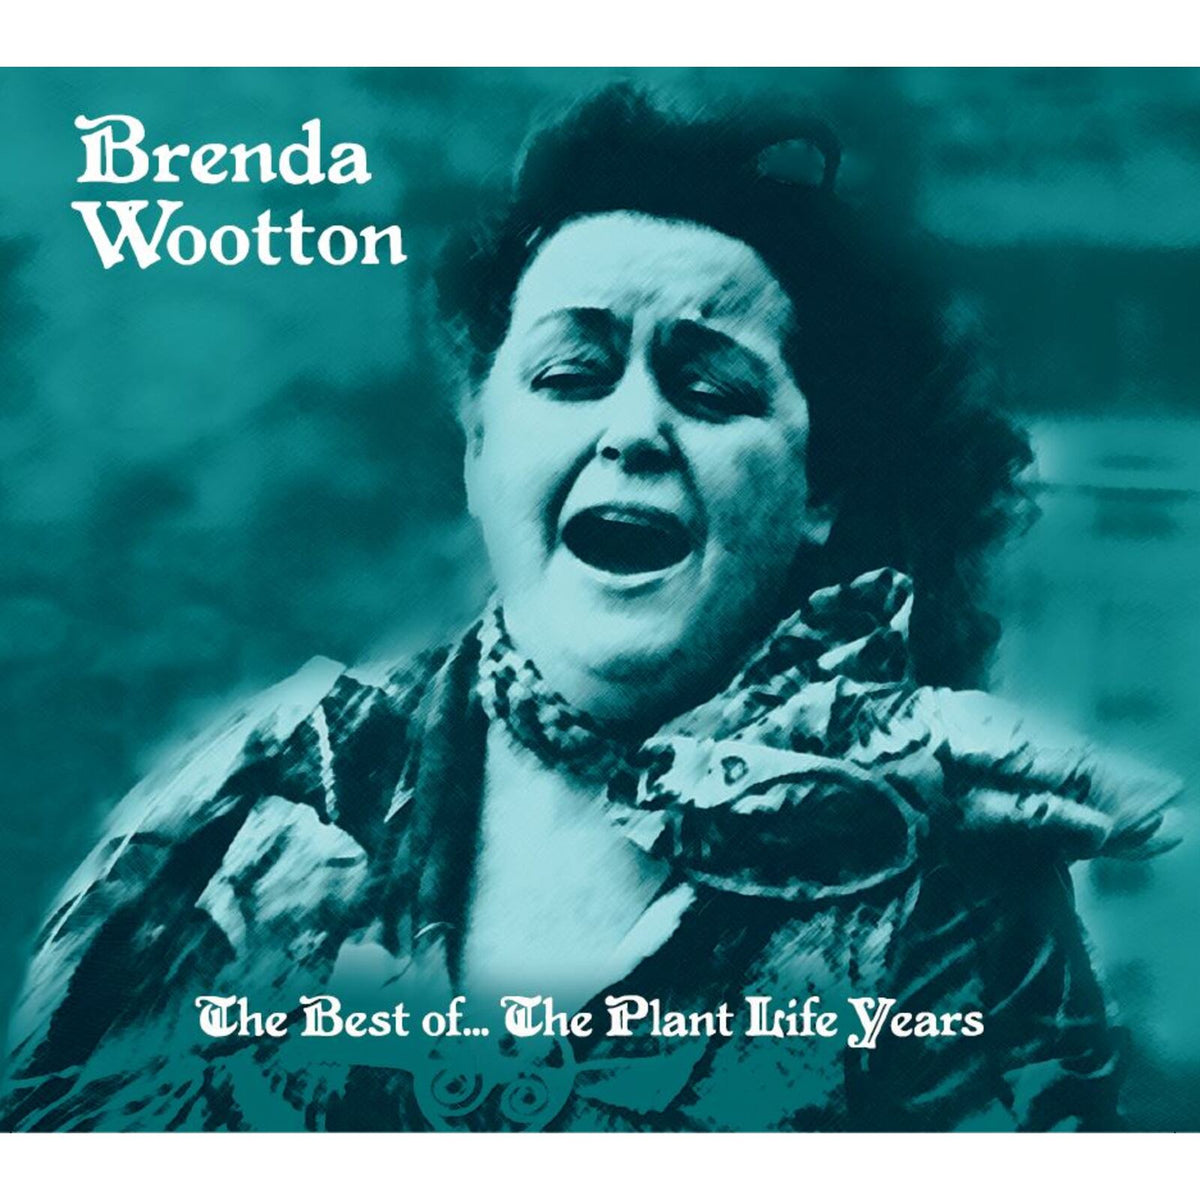 Brenda Wootton - The Best of... The Plant Life Years - PLR233